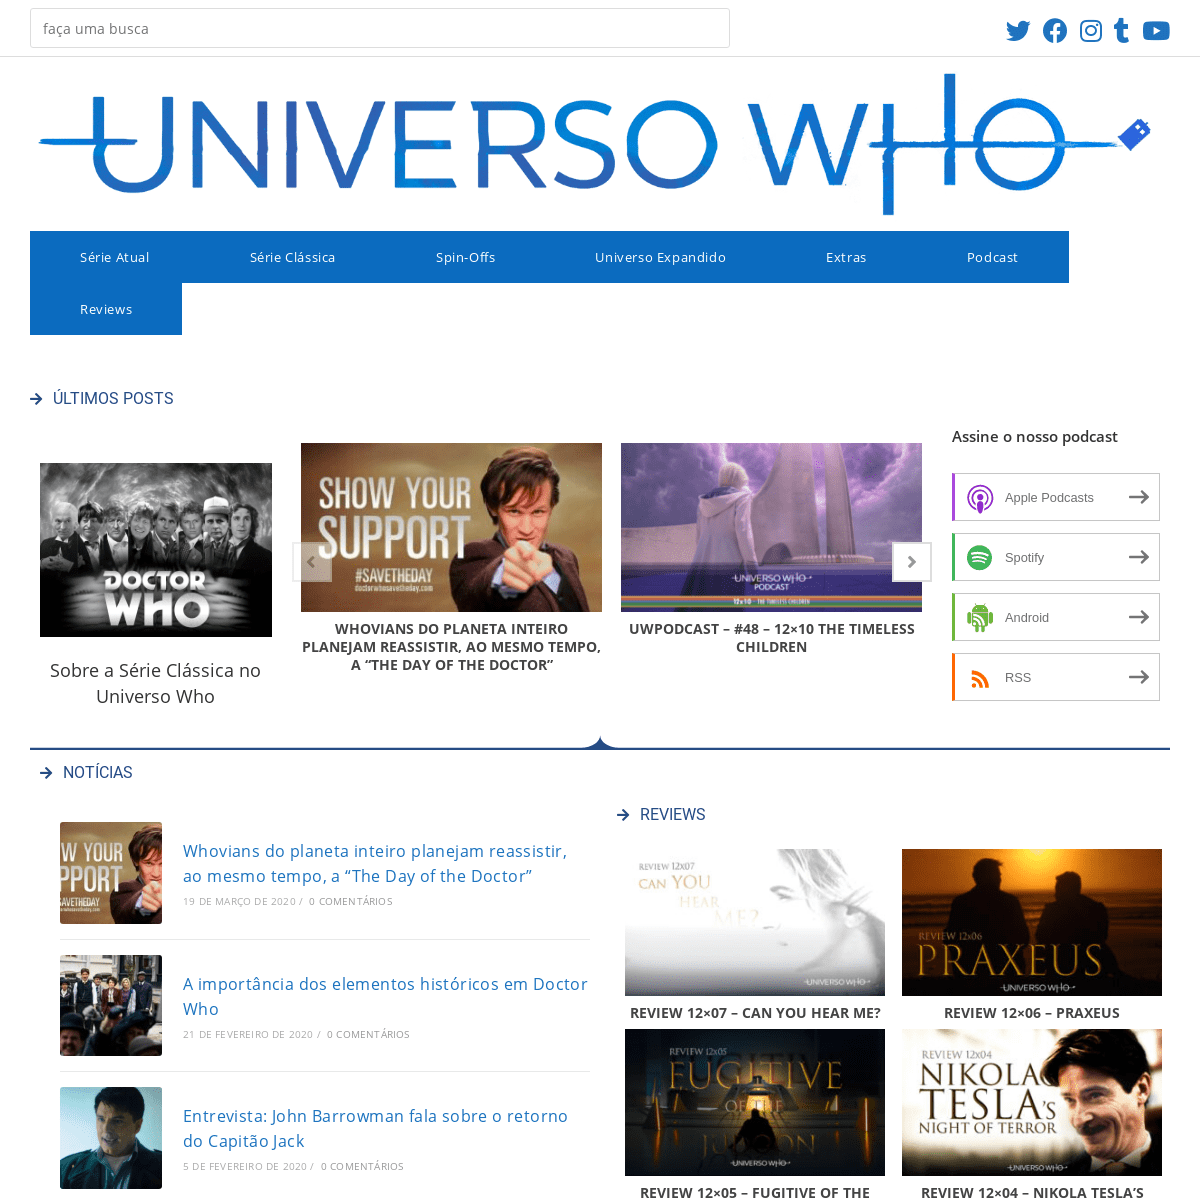 A complete backup of universowho.com